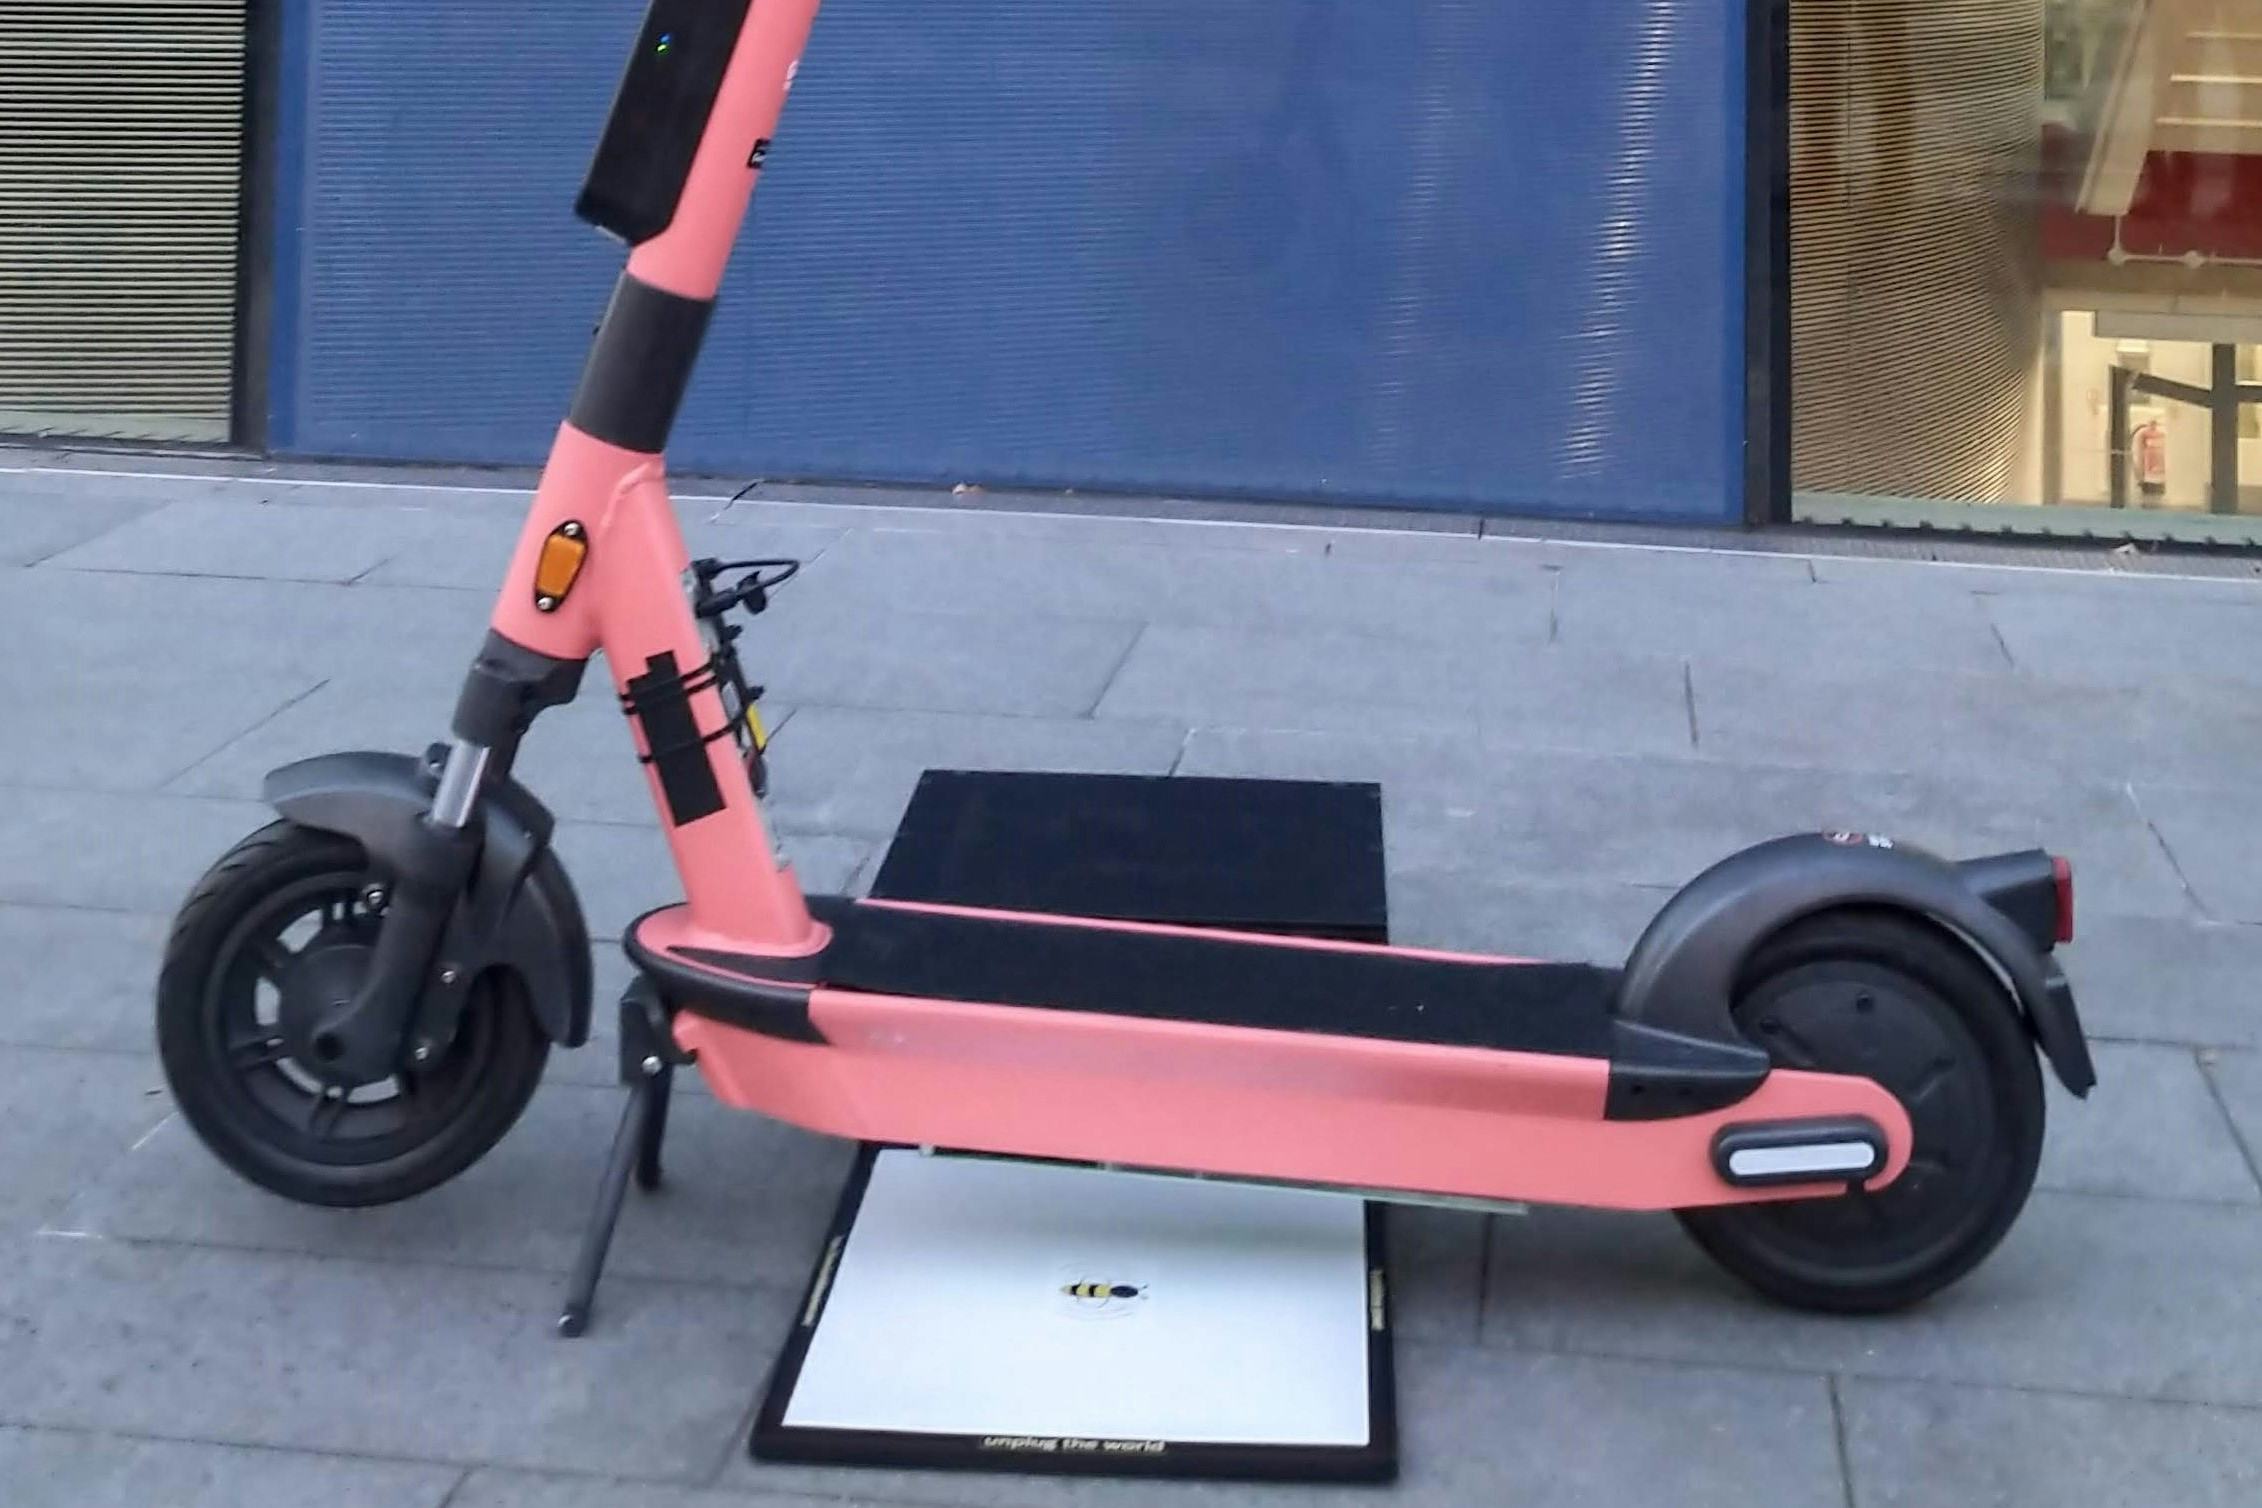 Bumblebee has retrofitted a Voi scooter with a receiving unit to demonstrate its cutting-edge wireless charging technology. - Photo Bumblebee Power 